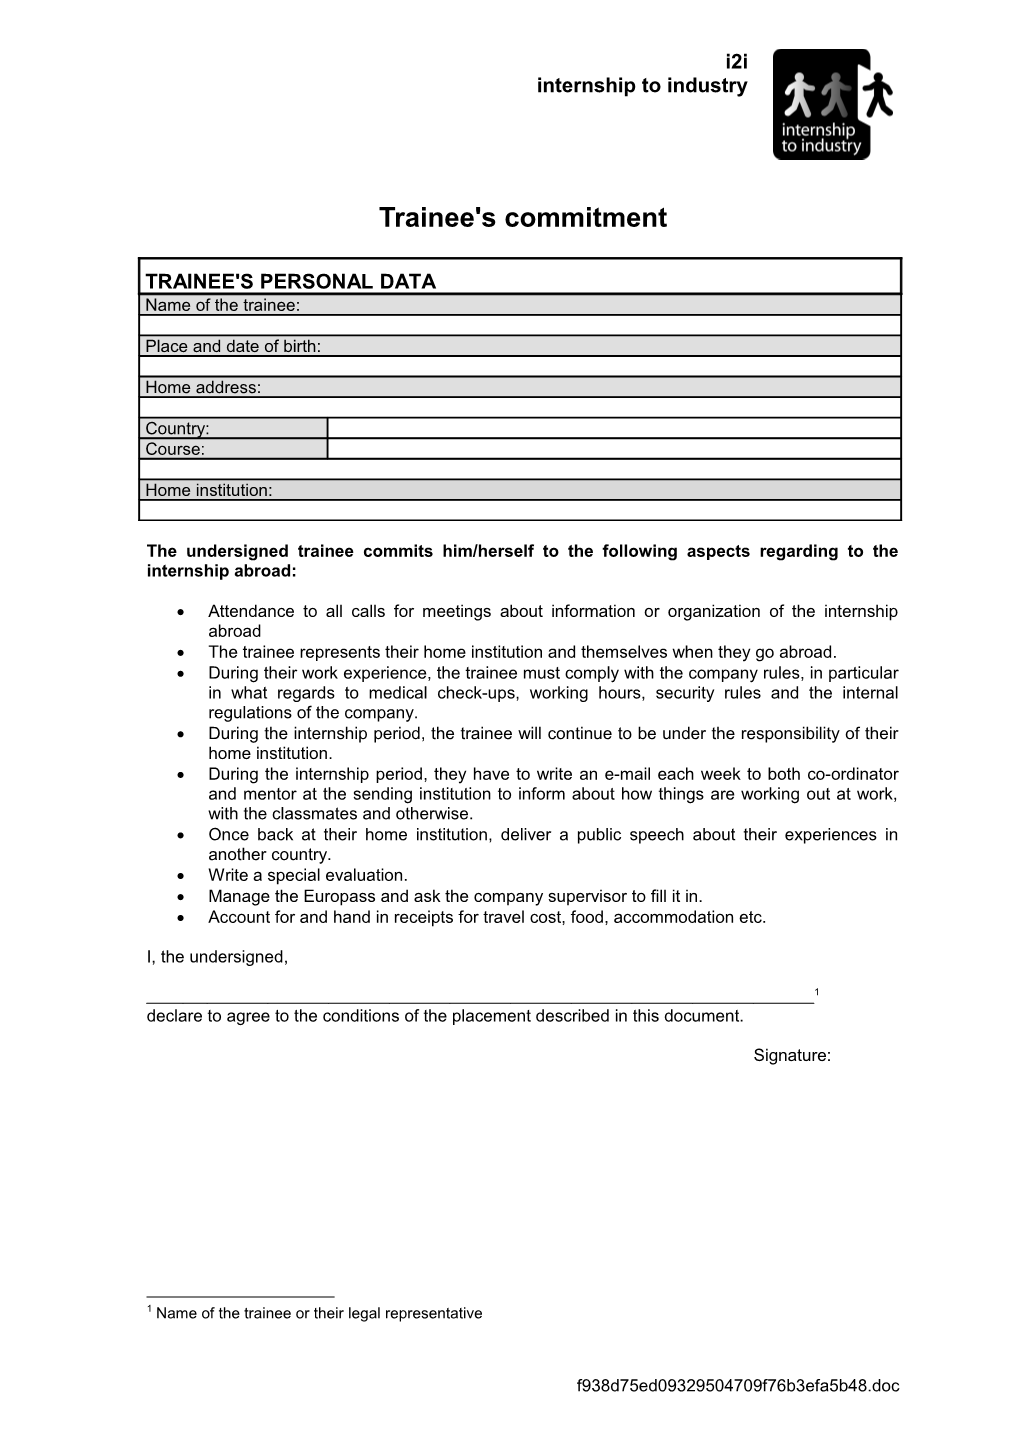 Trainee's Commitment TRAINEE's PERSONAL DATA